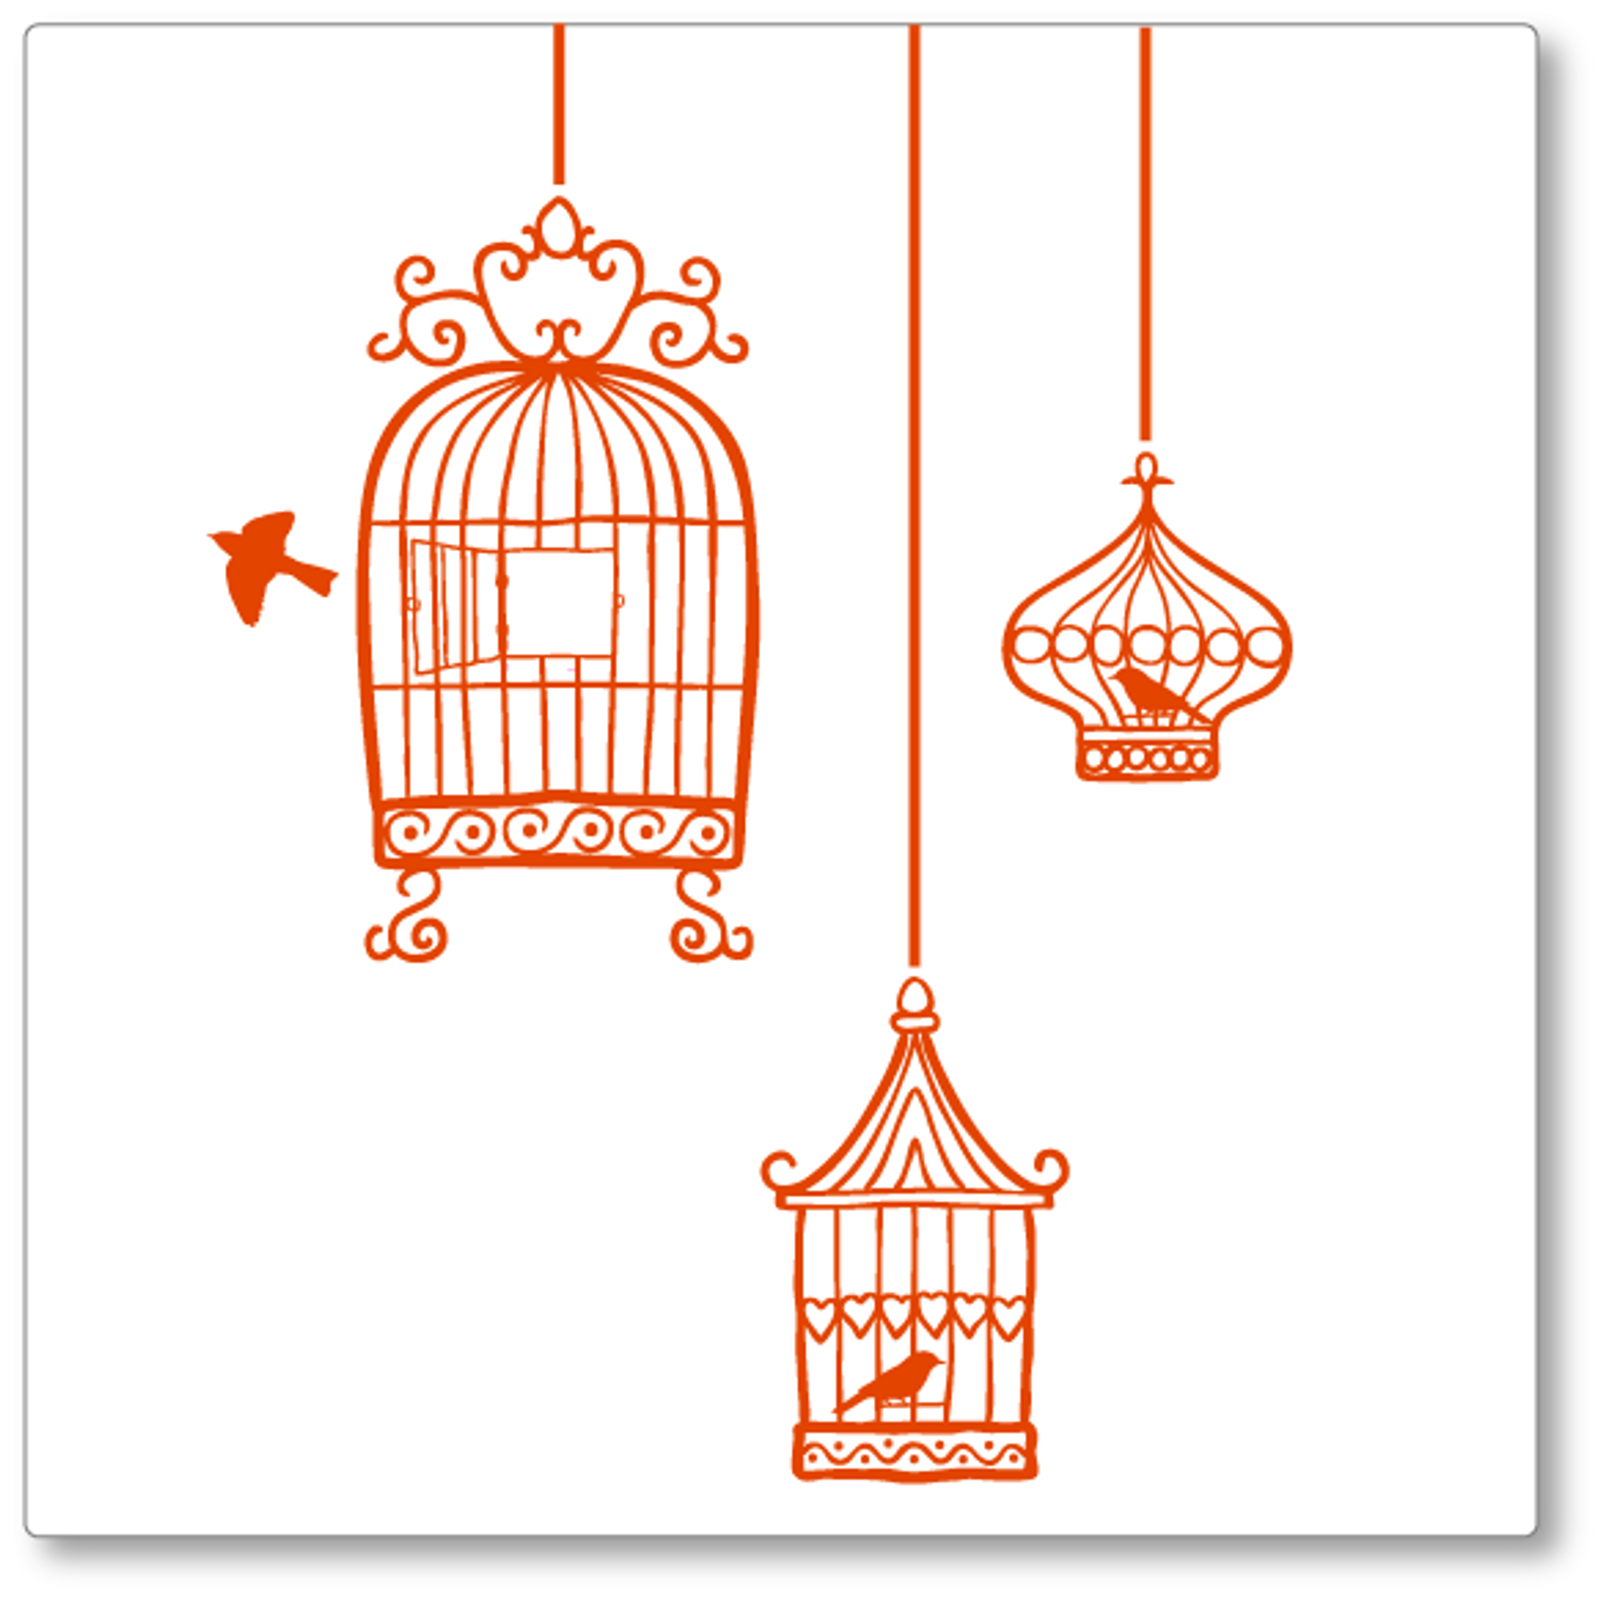 Our quirky set of 3 hanging birdcages was adapted from a hand drawn image. It adds flair to any wall. Shown here in orange, red birds.